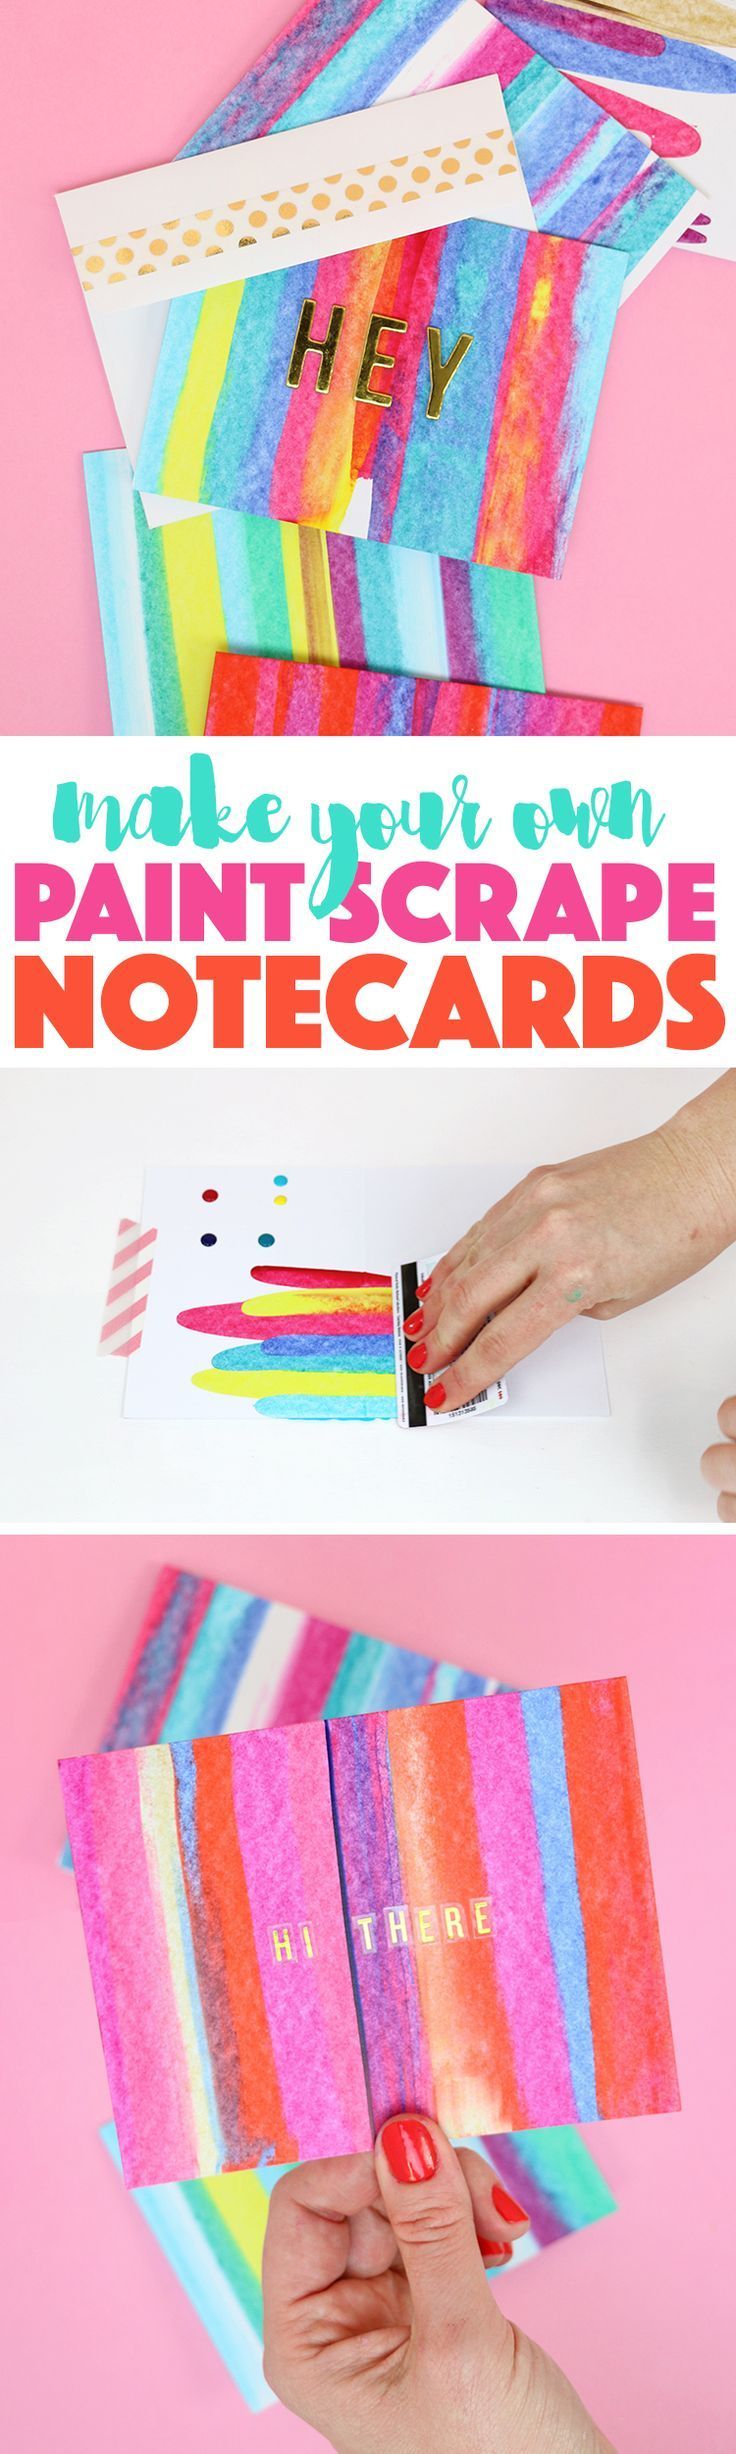 DIY art project idea – so easy and lots of fun – learn how to make paint scrape notecards.